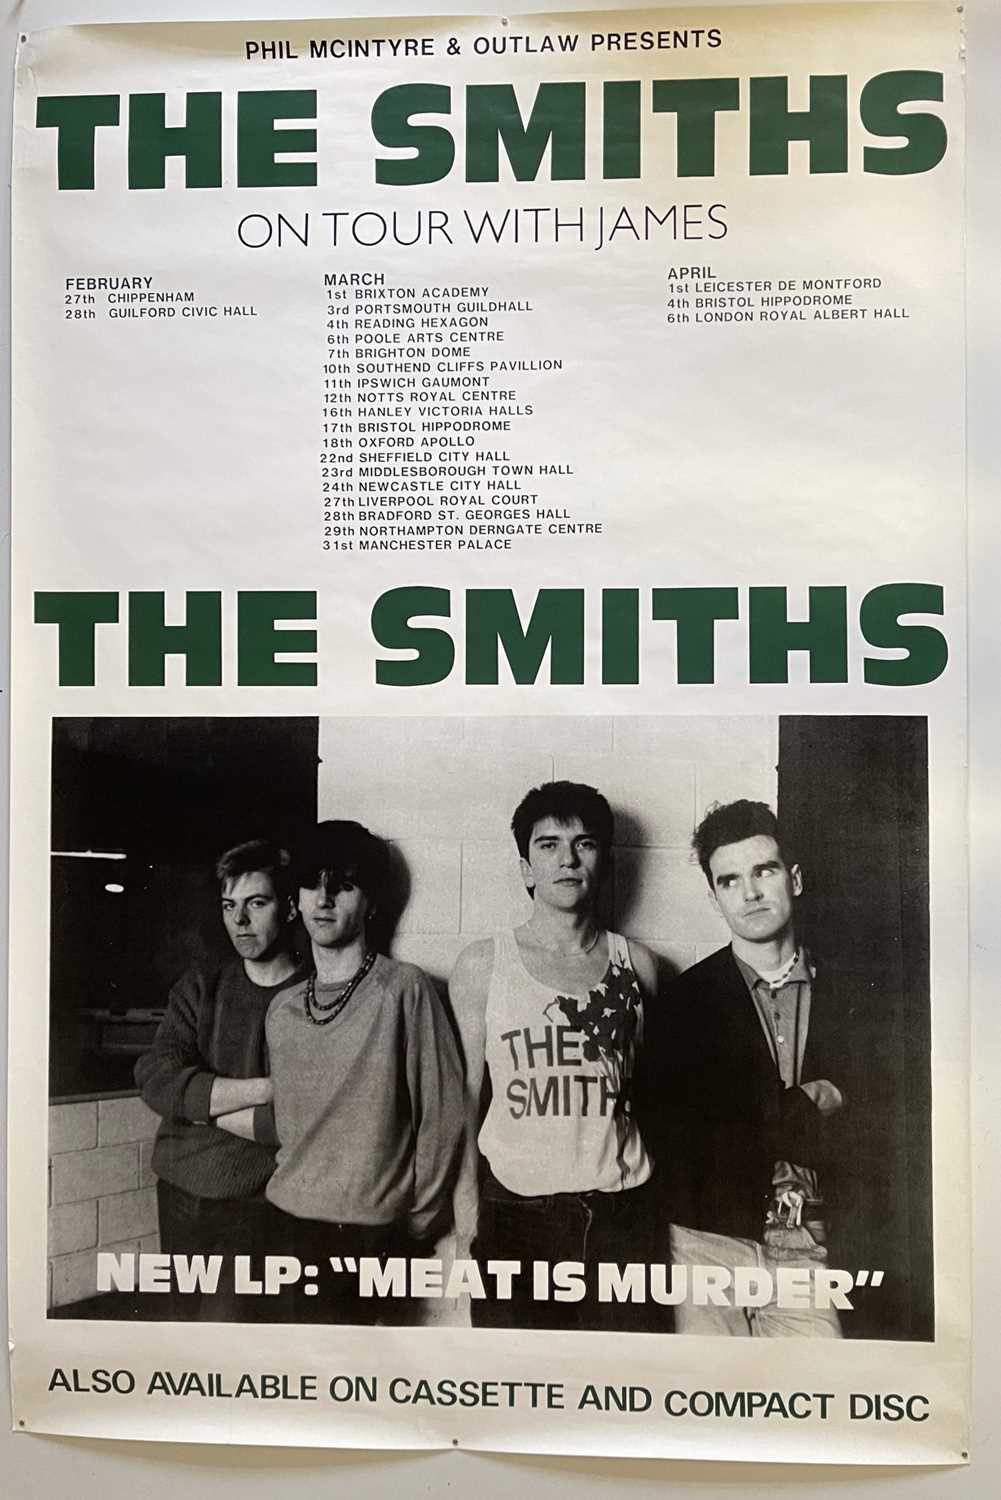 Lot 449 THE SMITHS ON TOUR WITH JAMES BILLBOARD